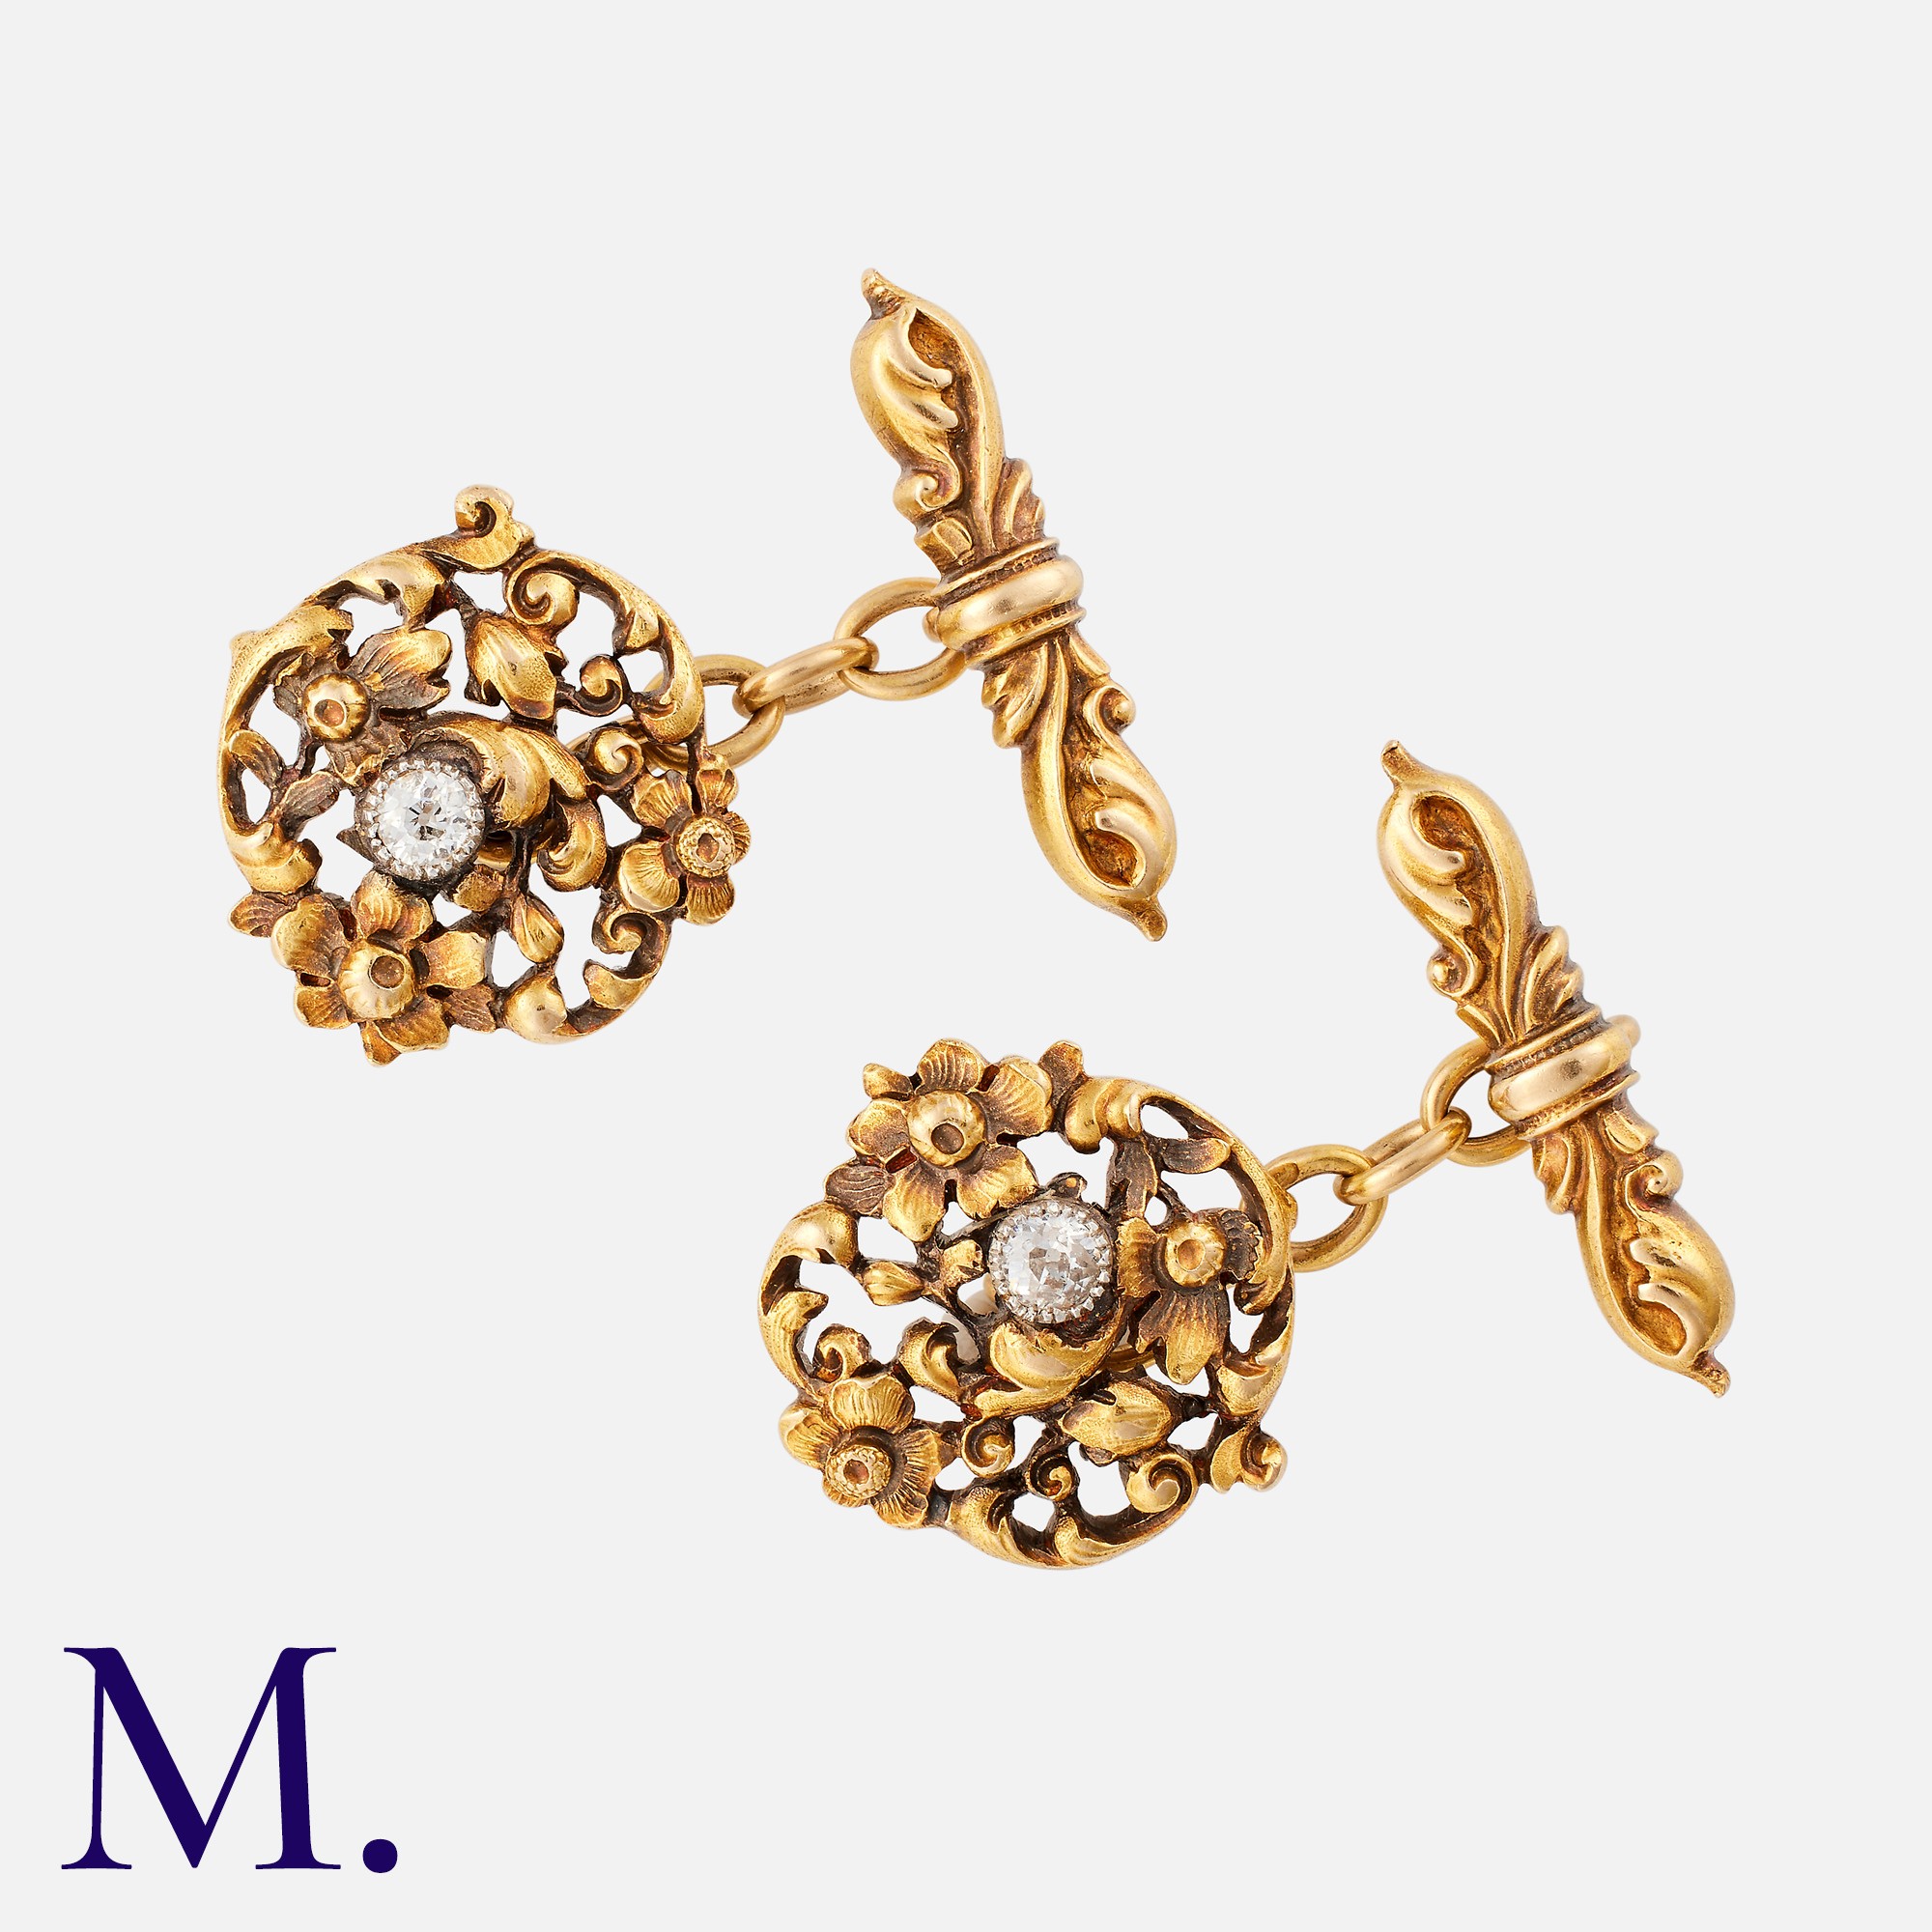 A Pair Of Art Nouveau Gold Cufflinks in 18k yellow gold, of floral, foliate design, each set with an